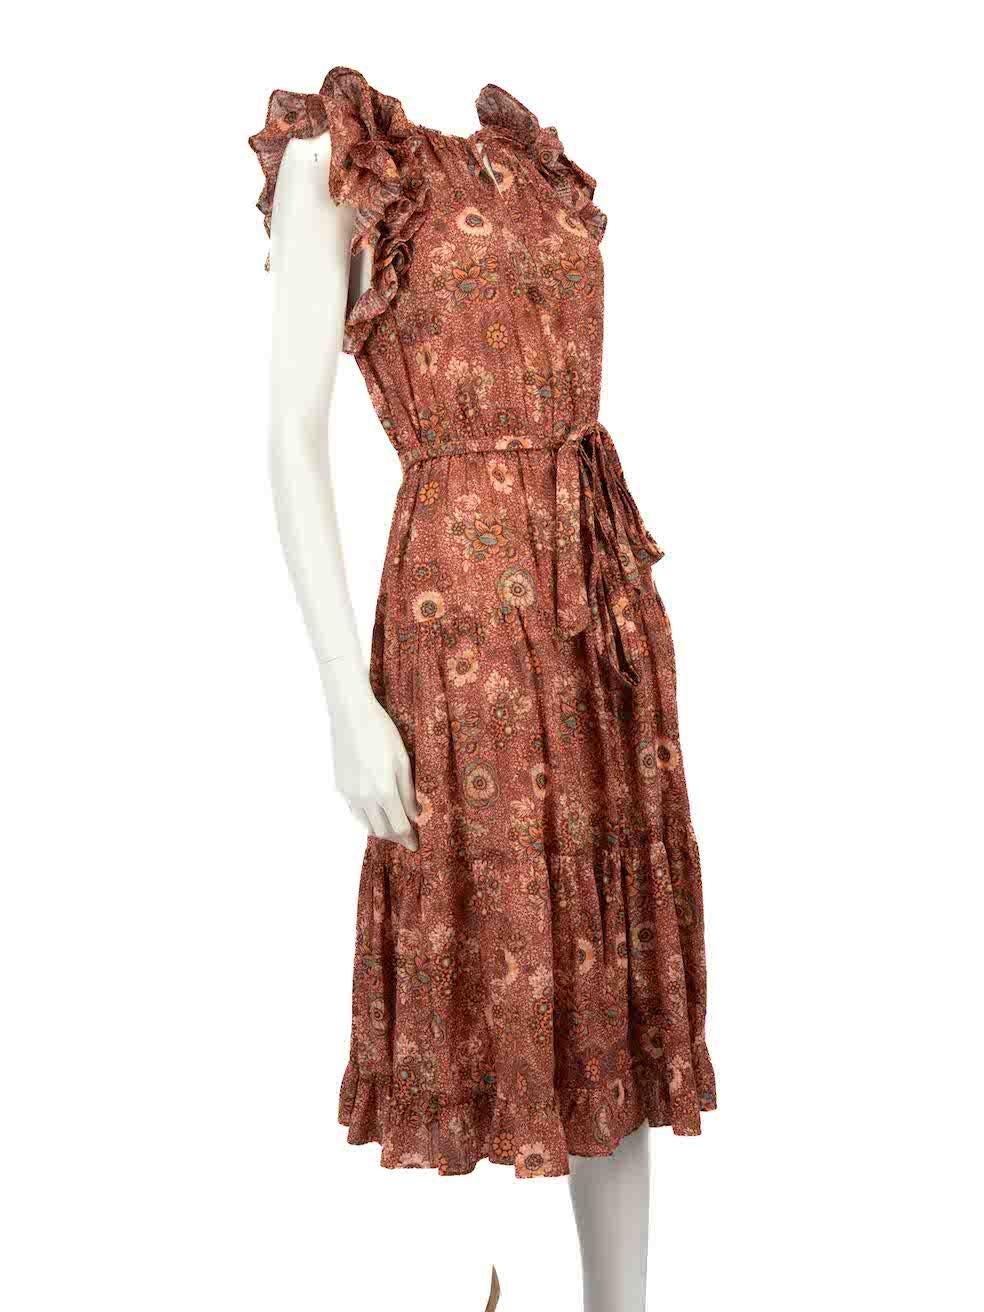 CONDITION is Very good. Hardly any visible wear to dress is evident on this used Ulla Johnson designer resale item.
 
 
 
 Details
 
 
 Multicolour- brown tone
 
 Cotton
 
 Dress
 
 Floral pattern
 
 Midi
 
 Sleeveless
 
 Ruffle trim
 
 Front neck